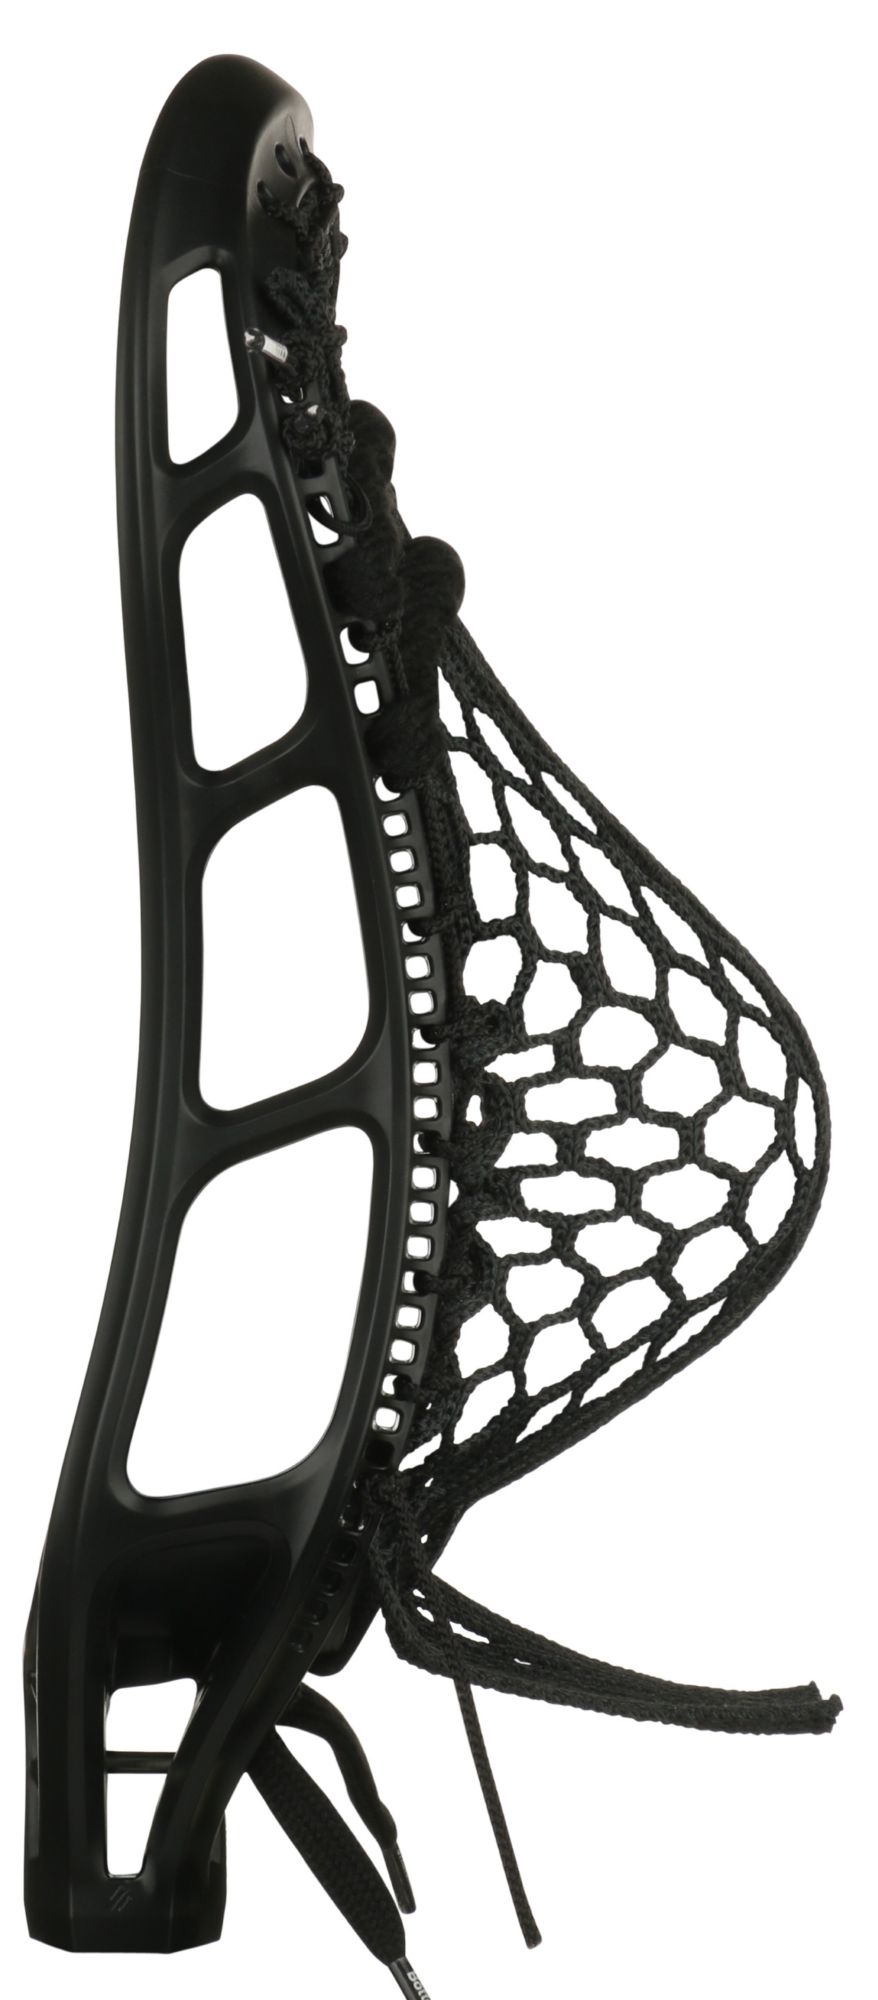 StringKing Mark 2A Lacrosse Head with 5S Mesh